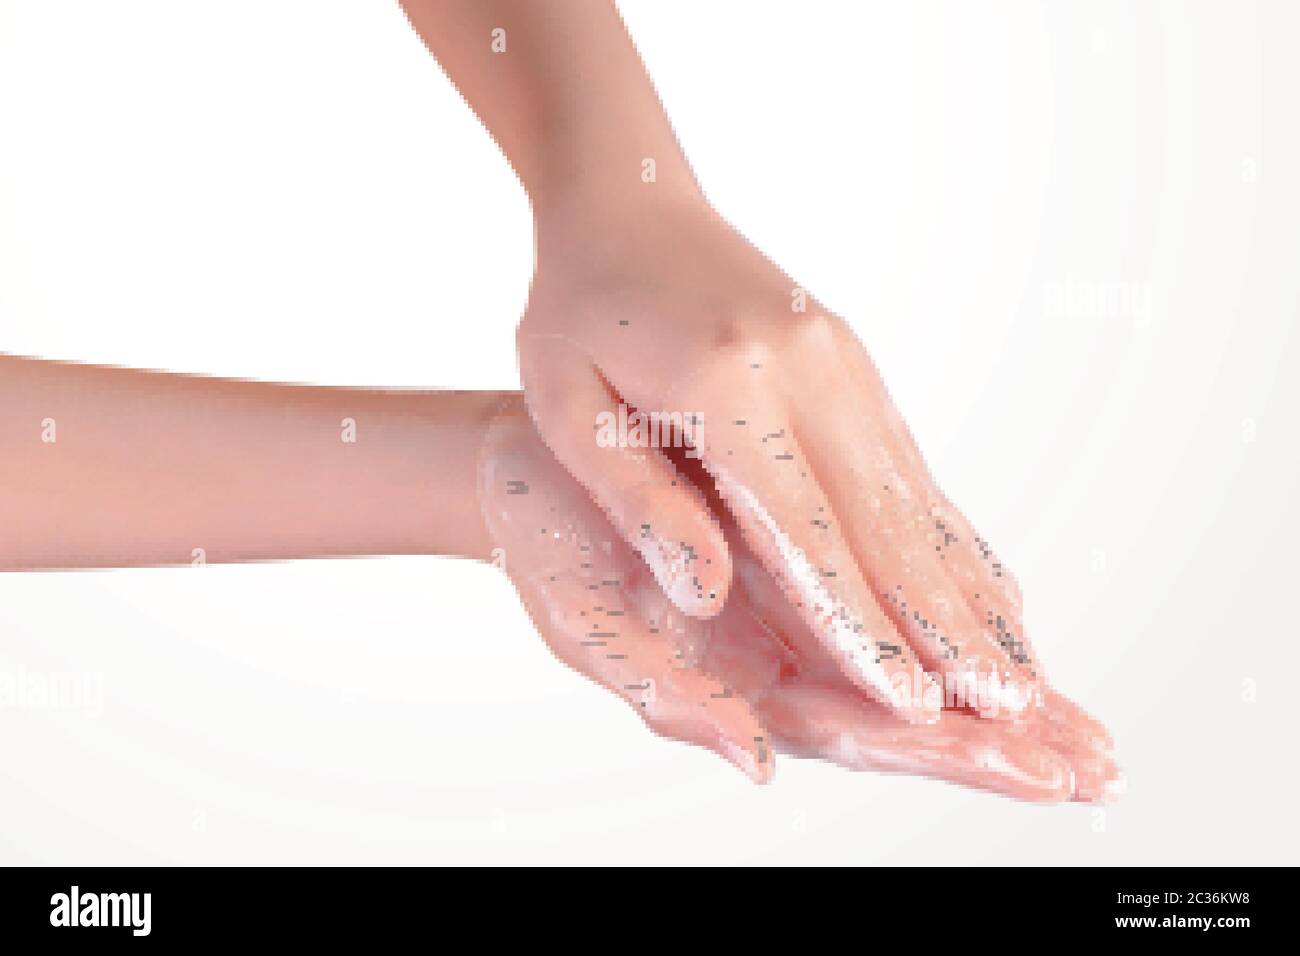 Realistic close-up of young woman washing her hands with creamy lather, isolated on white background, 3d illustration Stock Vector